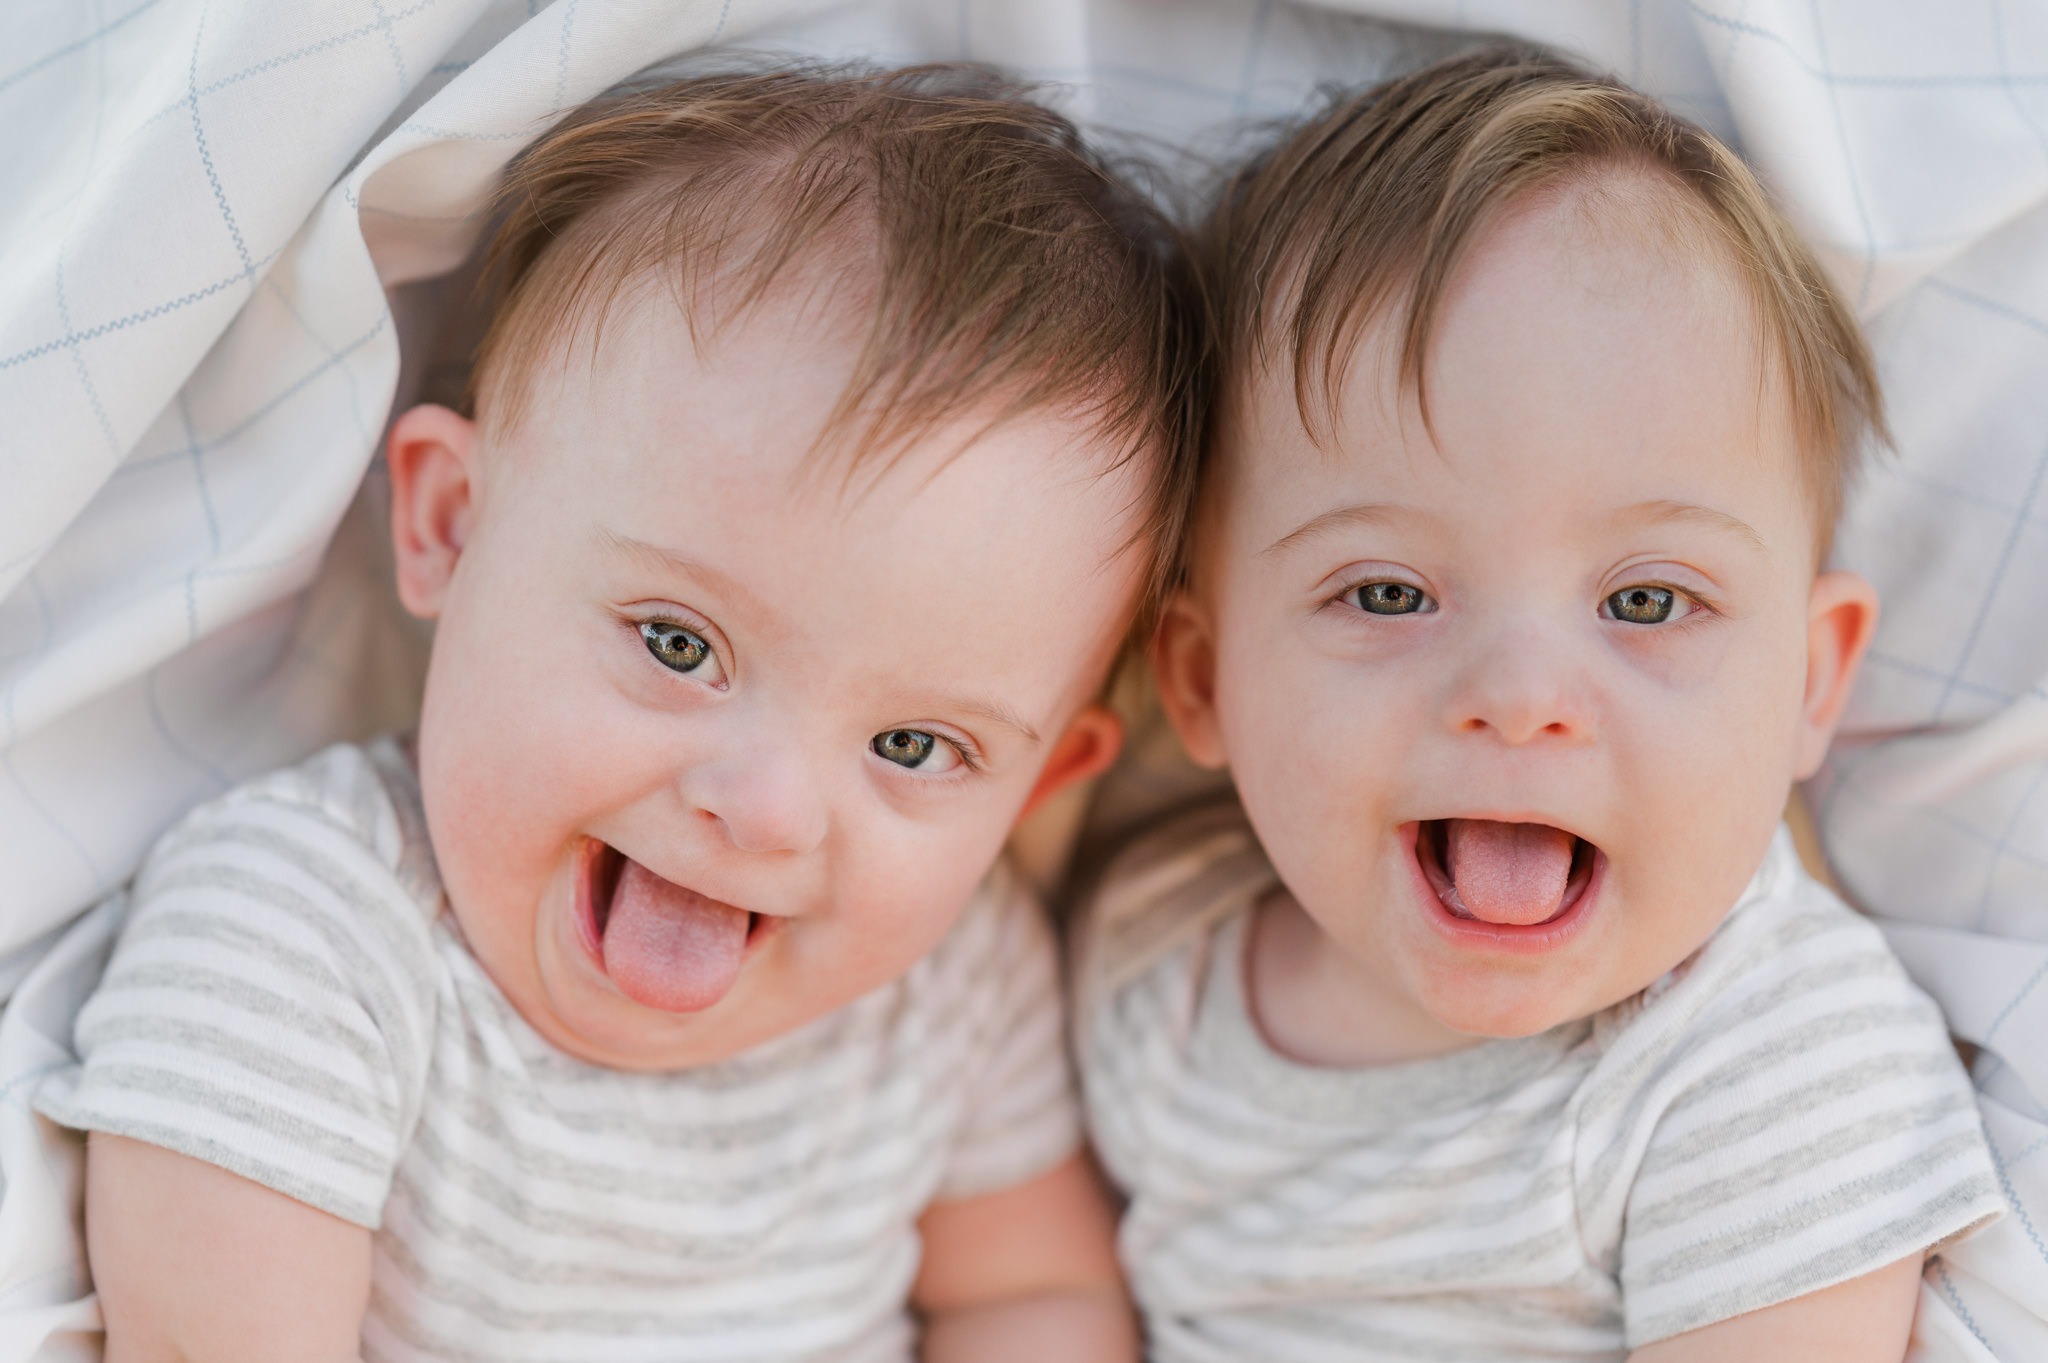 Identical twin boys with Down syndrome sit side by side and have huge smiles for the camera on their first birthday. Picture taken by their mom, San Antonio inclusive photographer Cassey Golden.